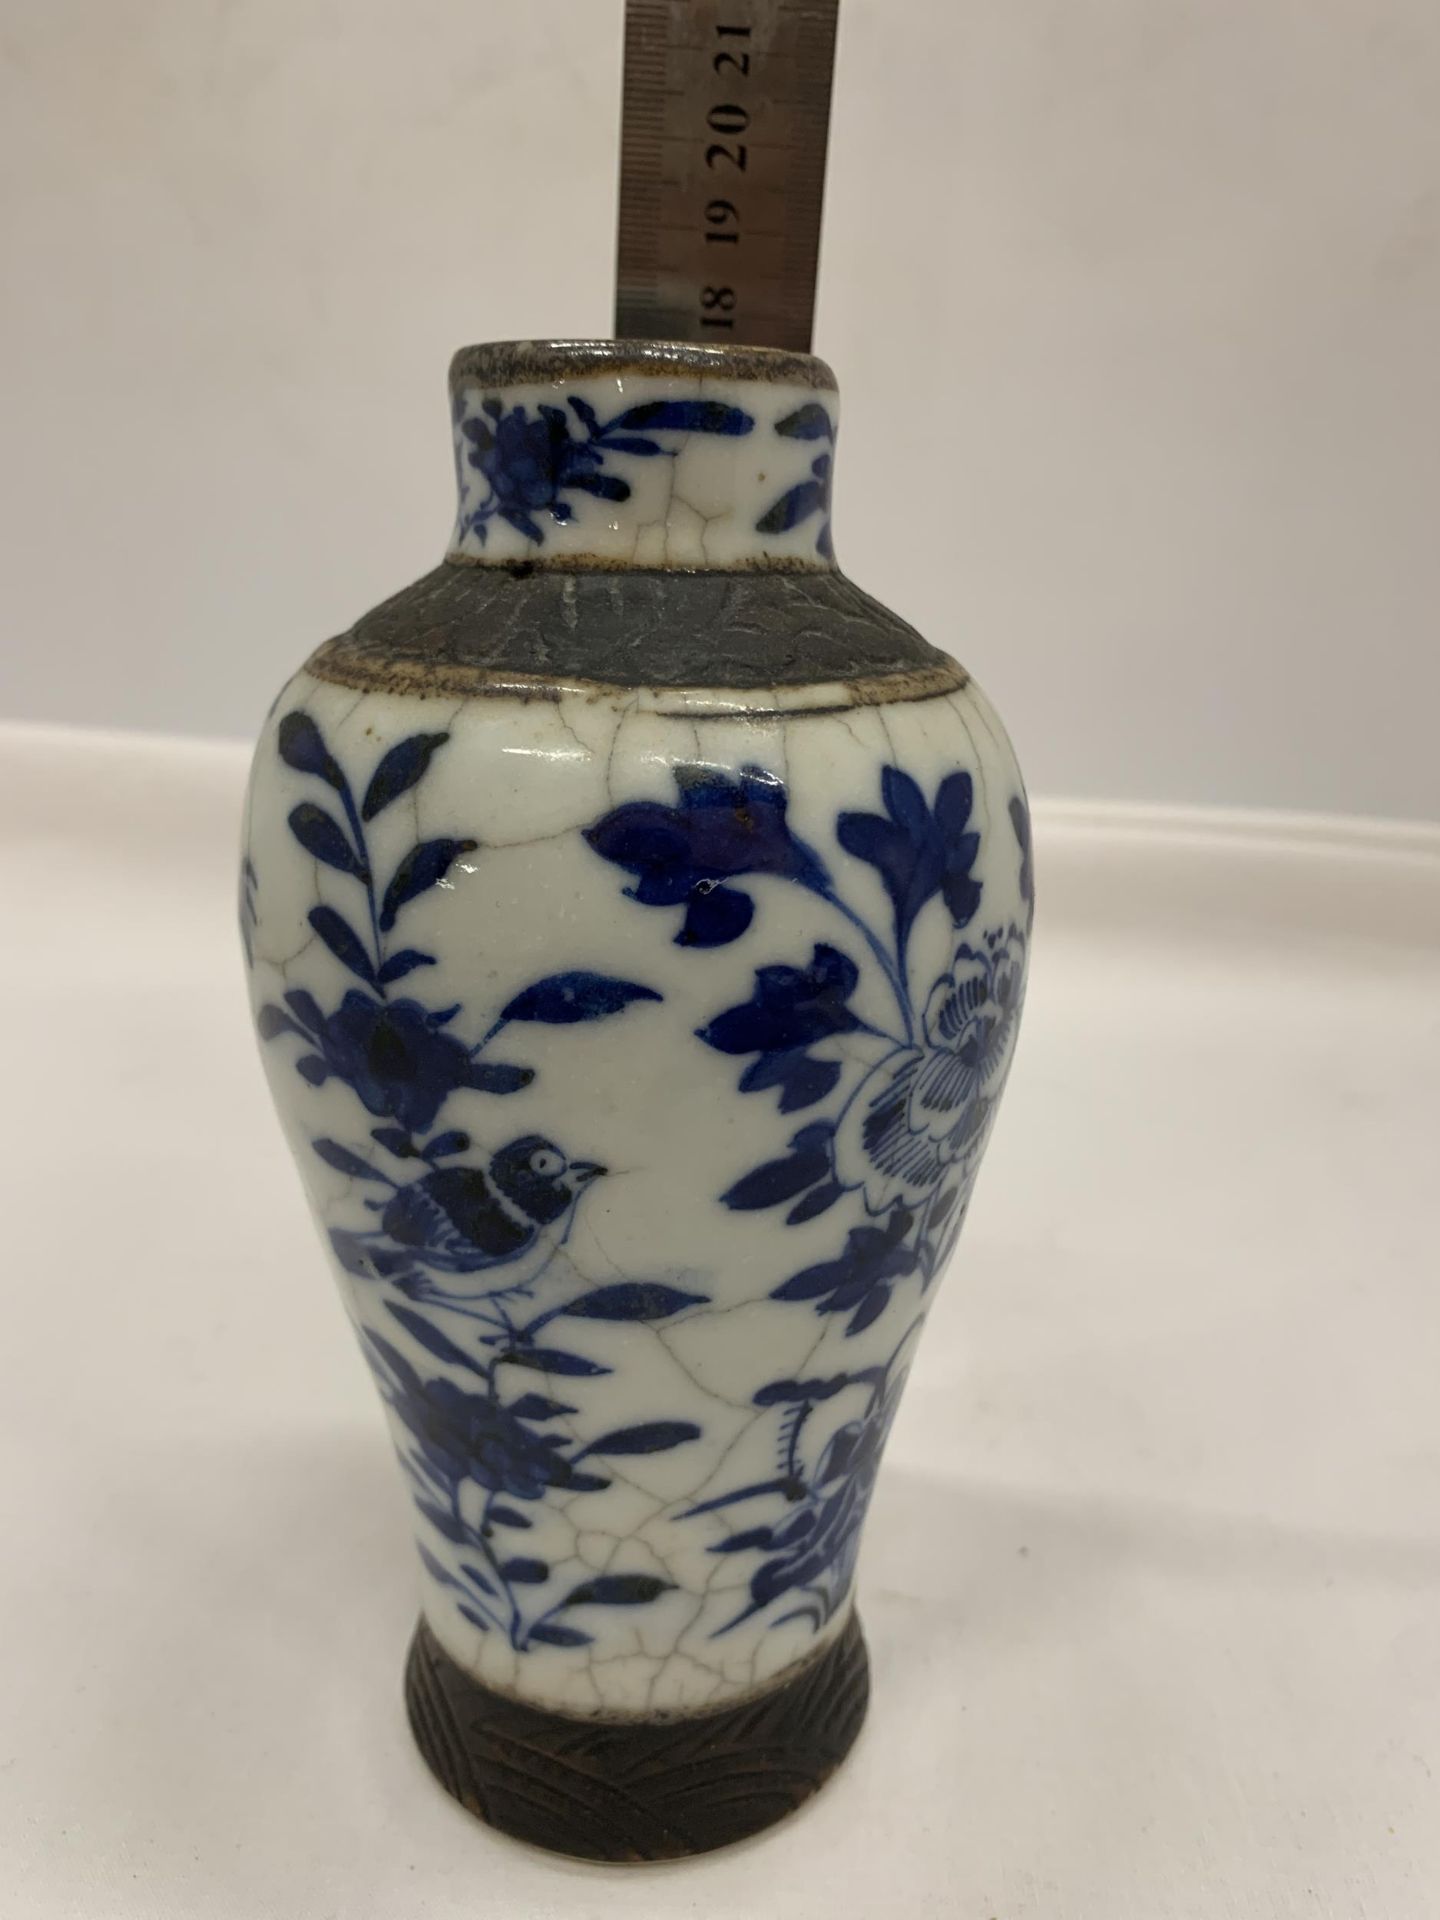 A LATE 19TH / EARLY 20TH CENTURY CHINESE BLUE AND WHITE CRACKLE GLAZE PORCELAIN VASE, FOUR CHARACTER - Image 5 of 5